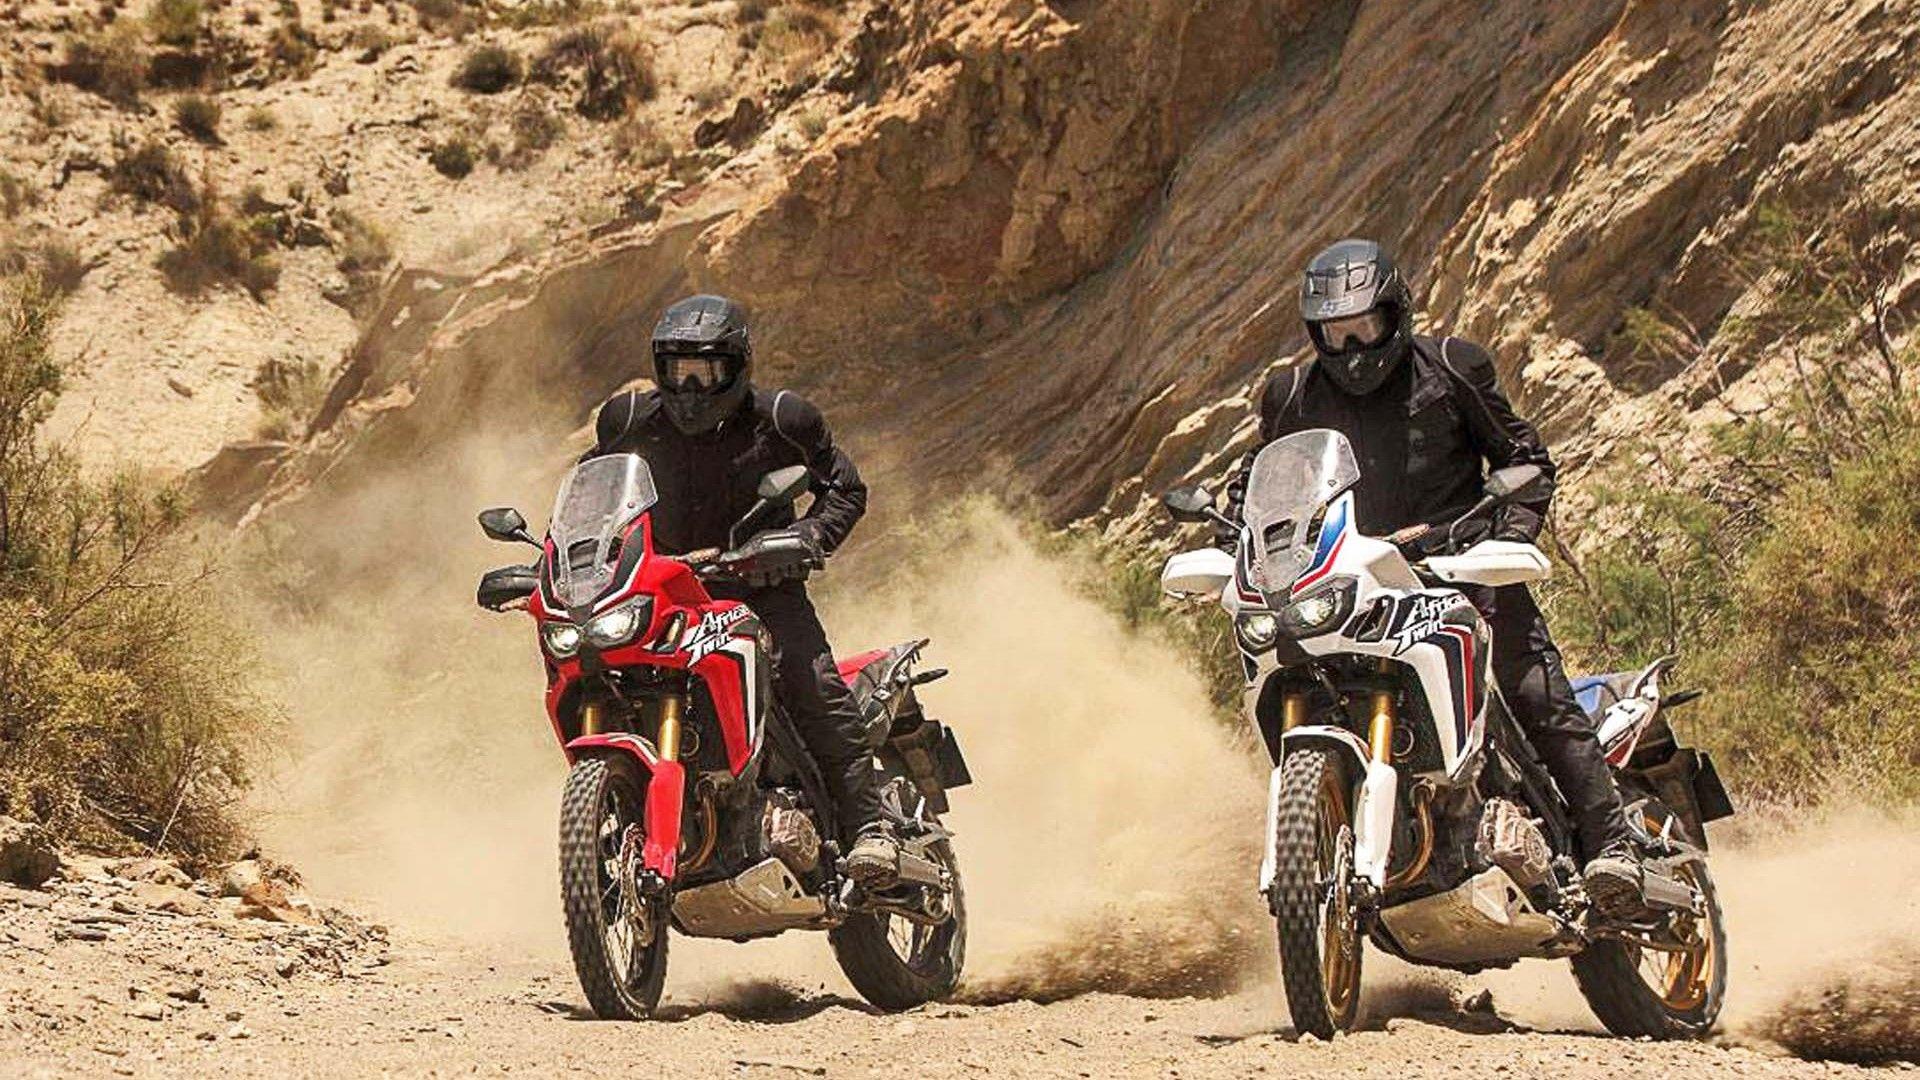 Honda Africa Twin Pricing Announced